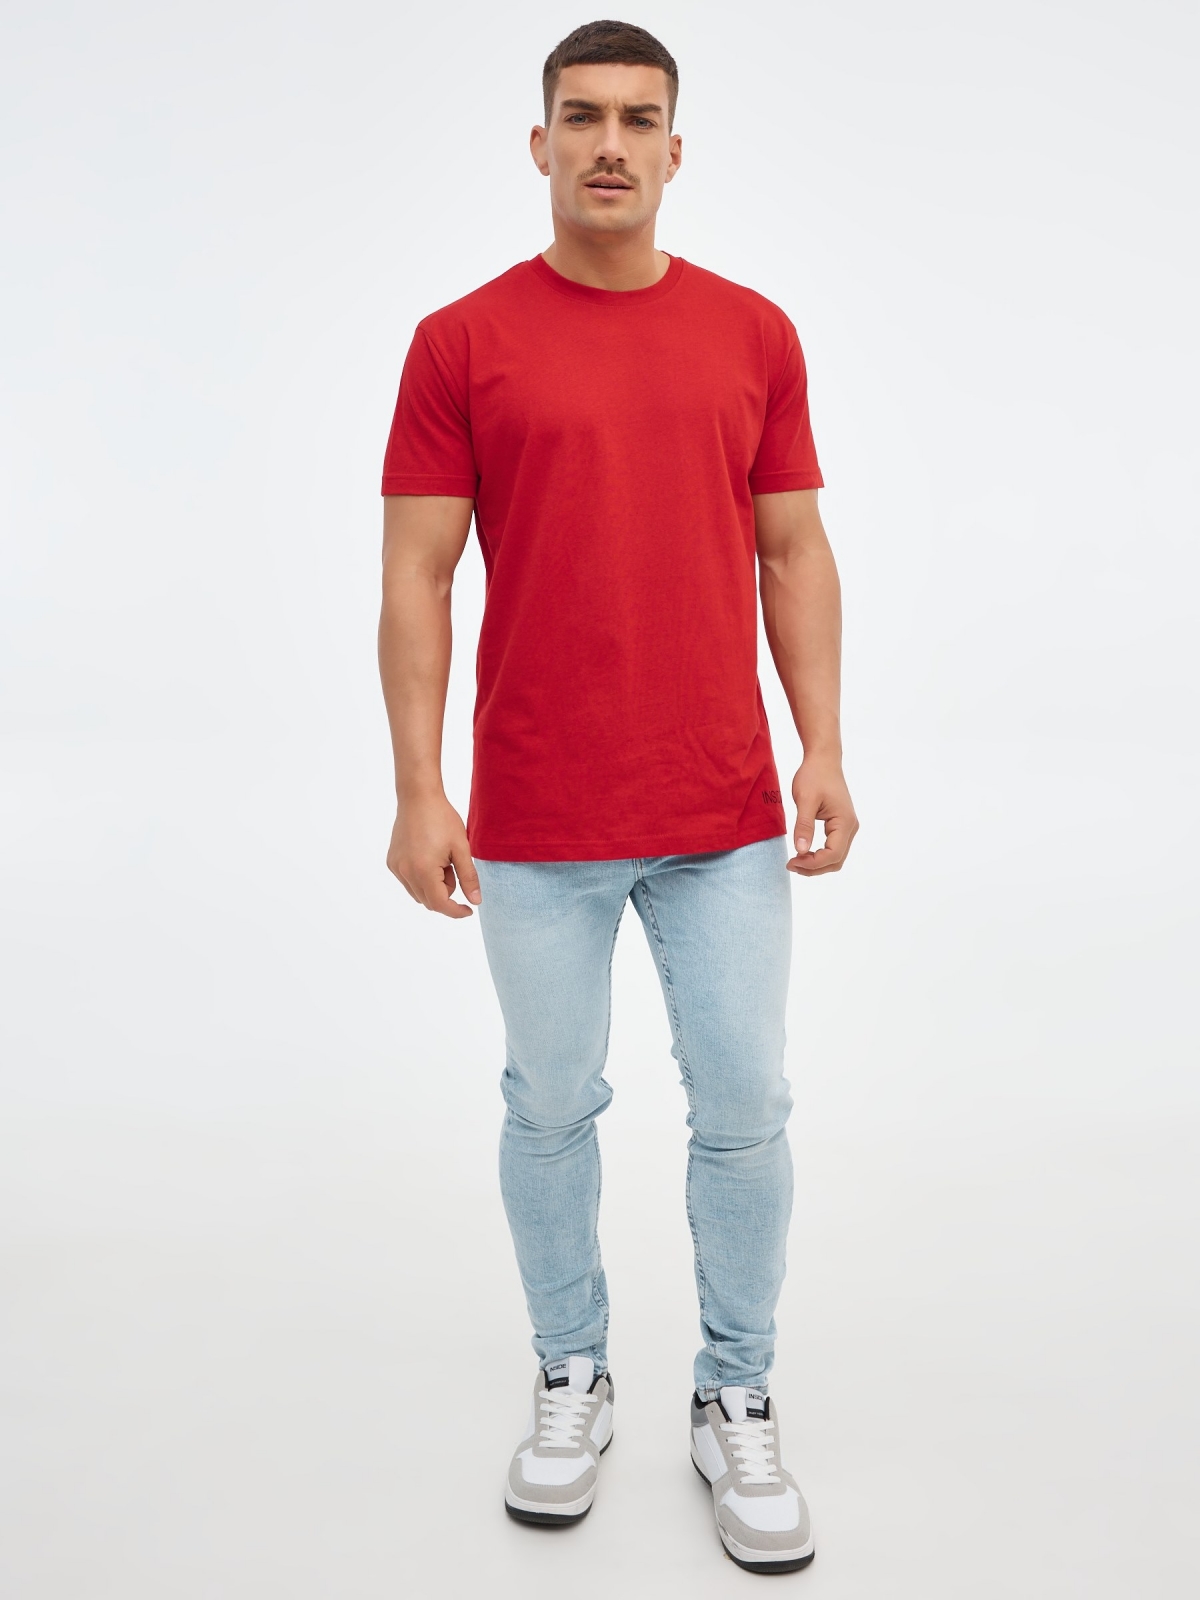 Basic short sleeve t-shirt red front view